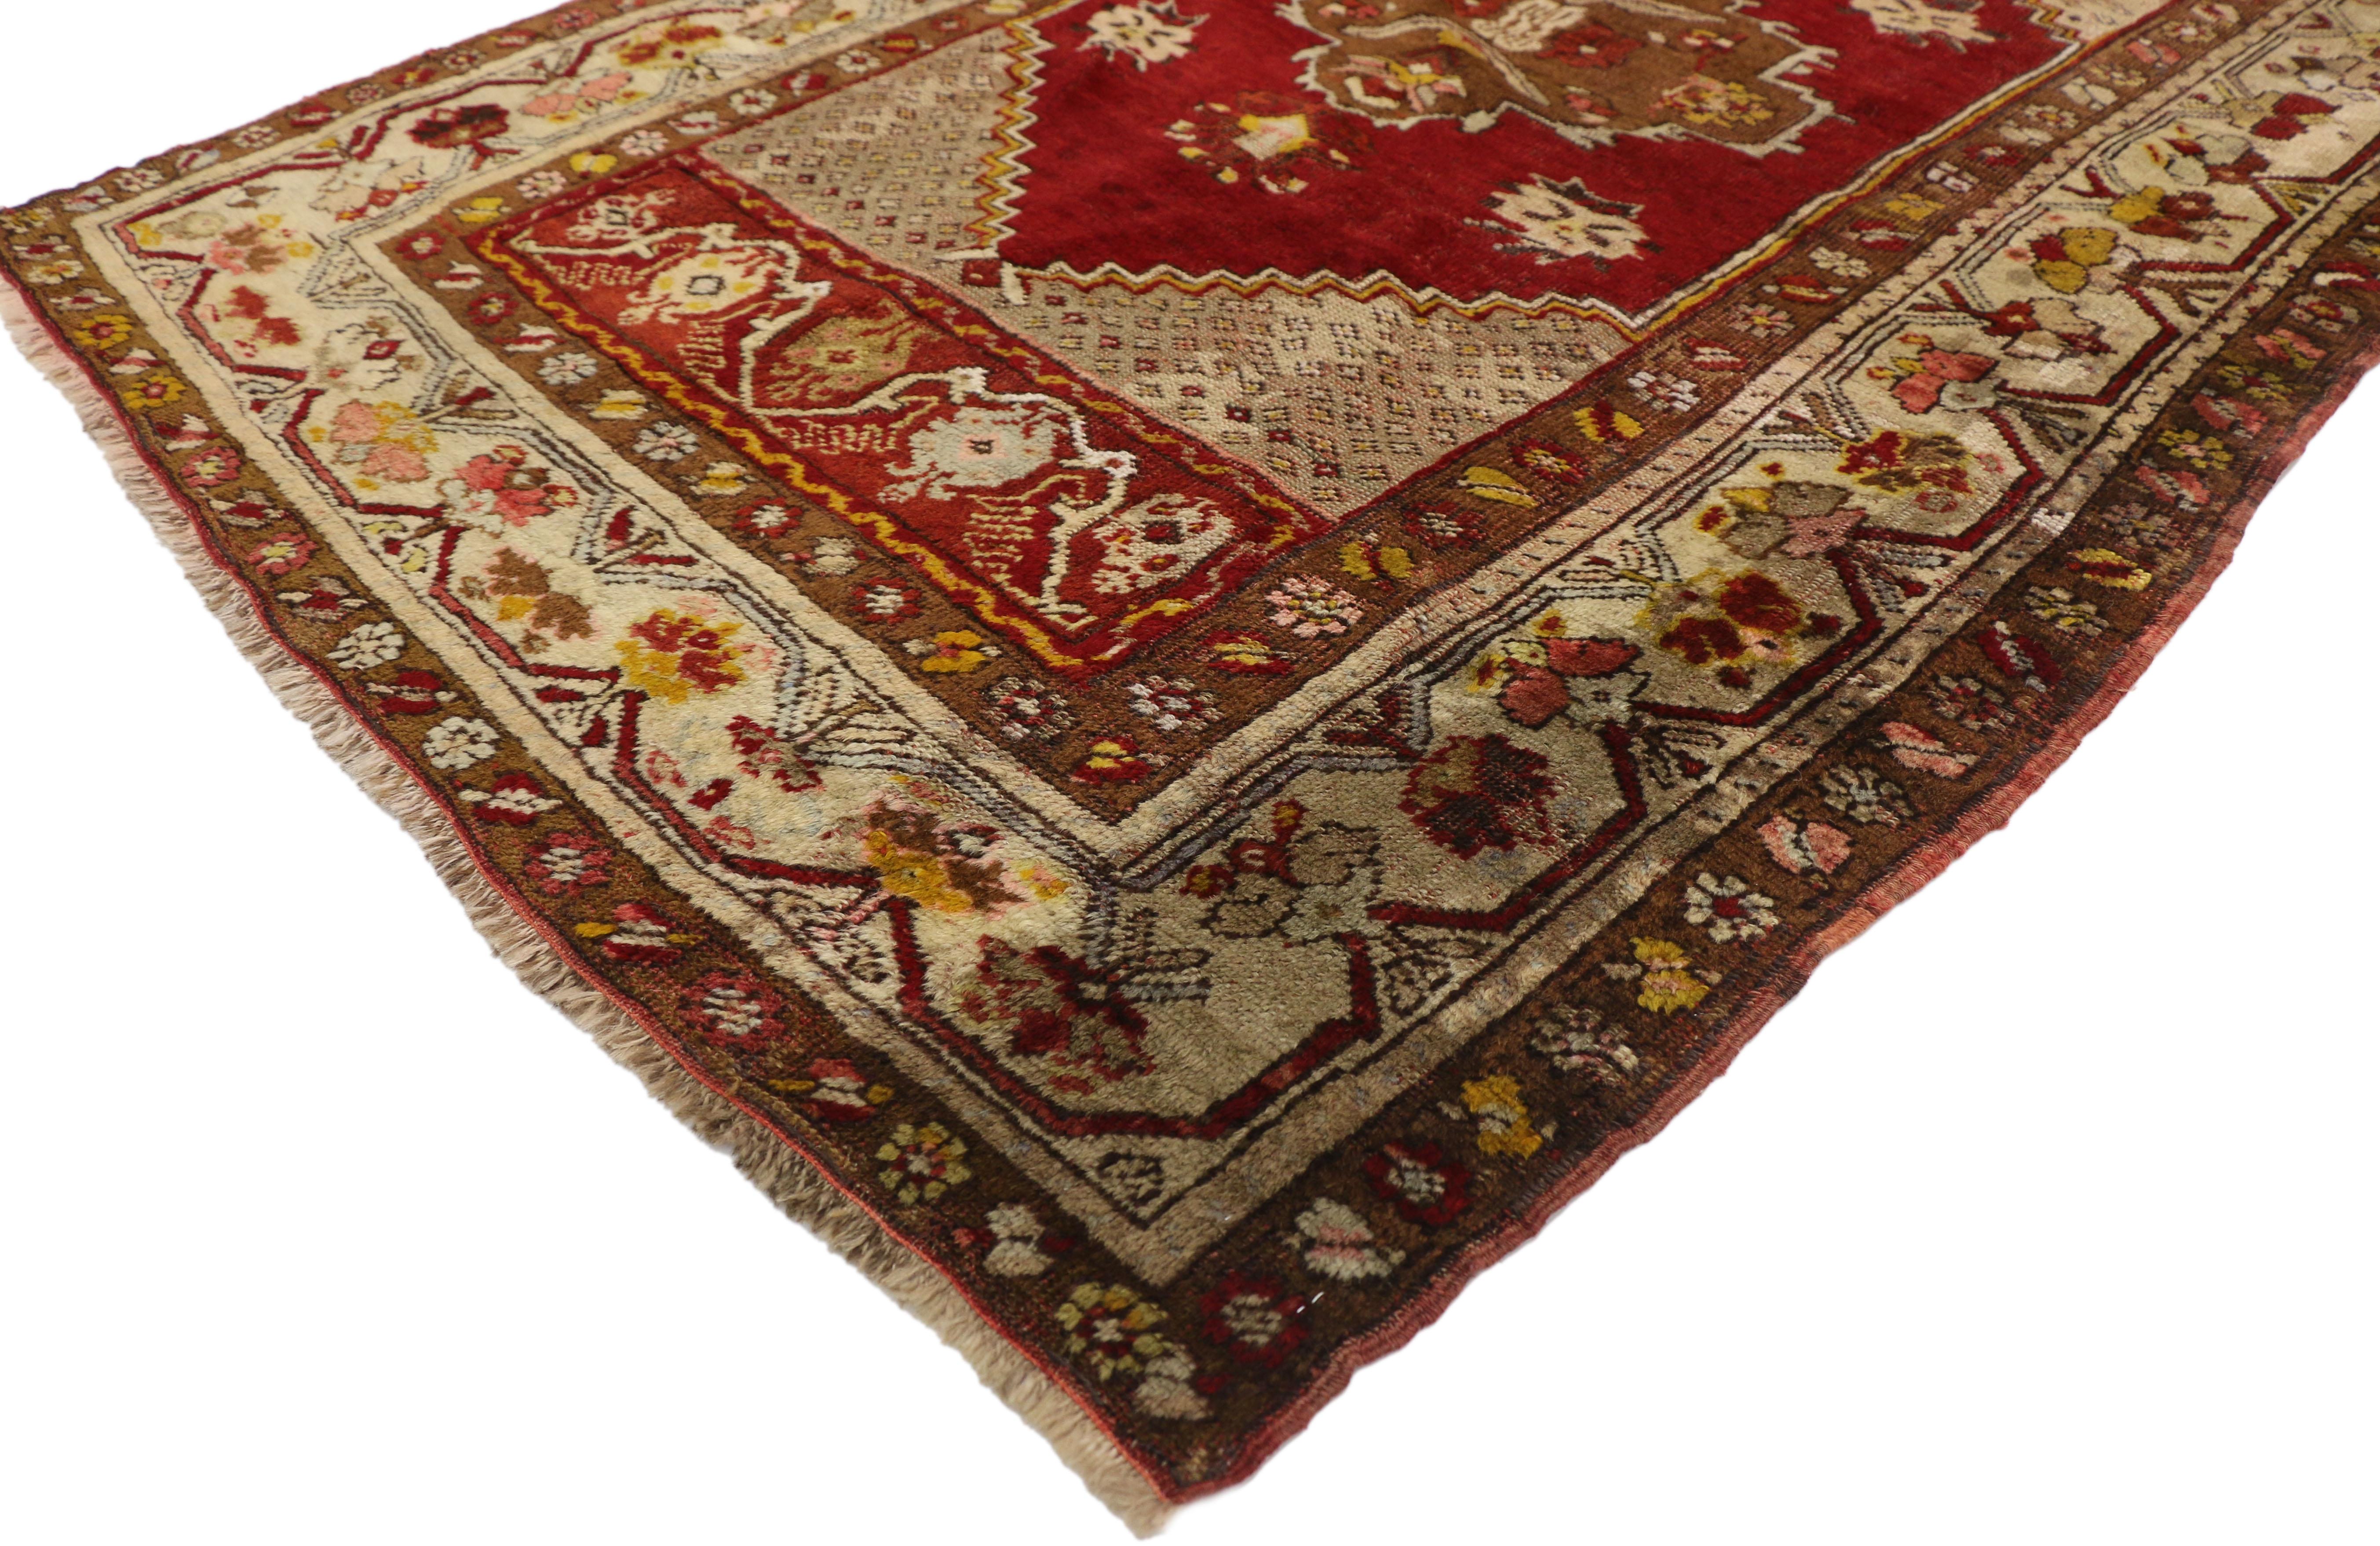 77284 Vintage Turkish Oushak Hallway runner with Modern Art Deco Style. This hand knotted wool vintage Turkish Oushak hallway runner features three cusped coffee-camel colored cusped medallions floating in an abrashed ruby red field dotted with